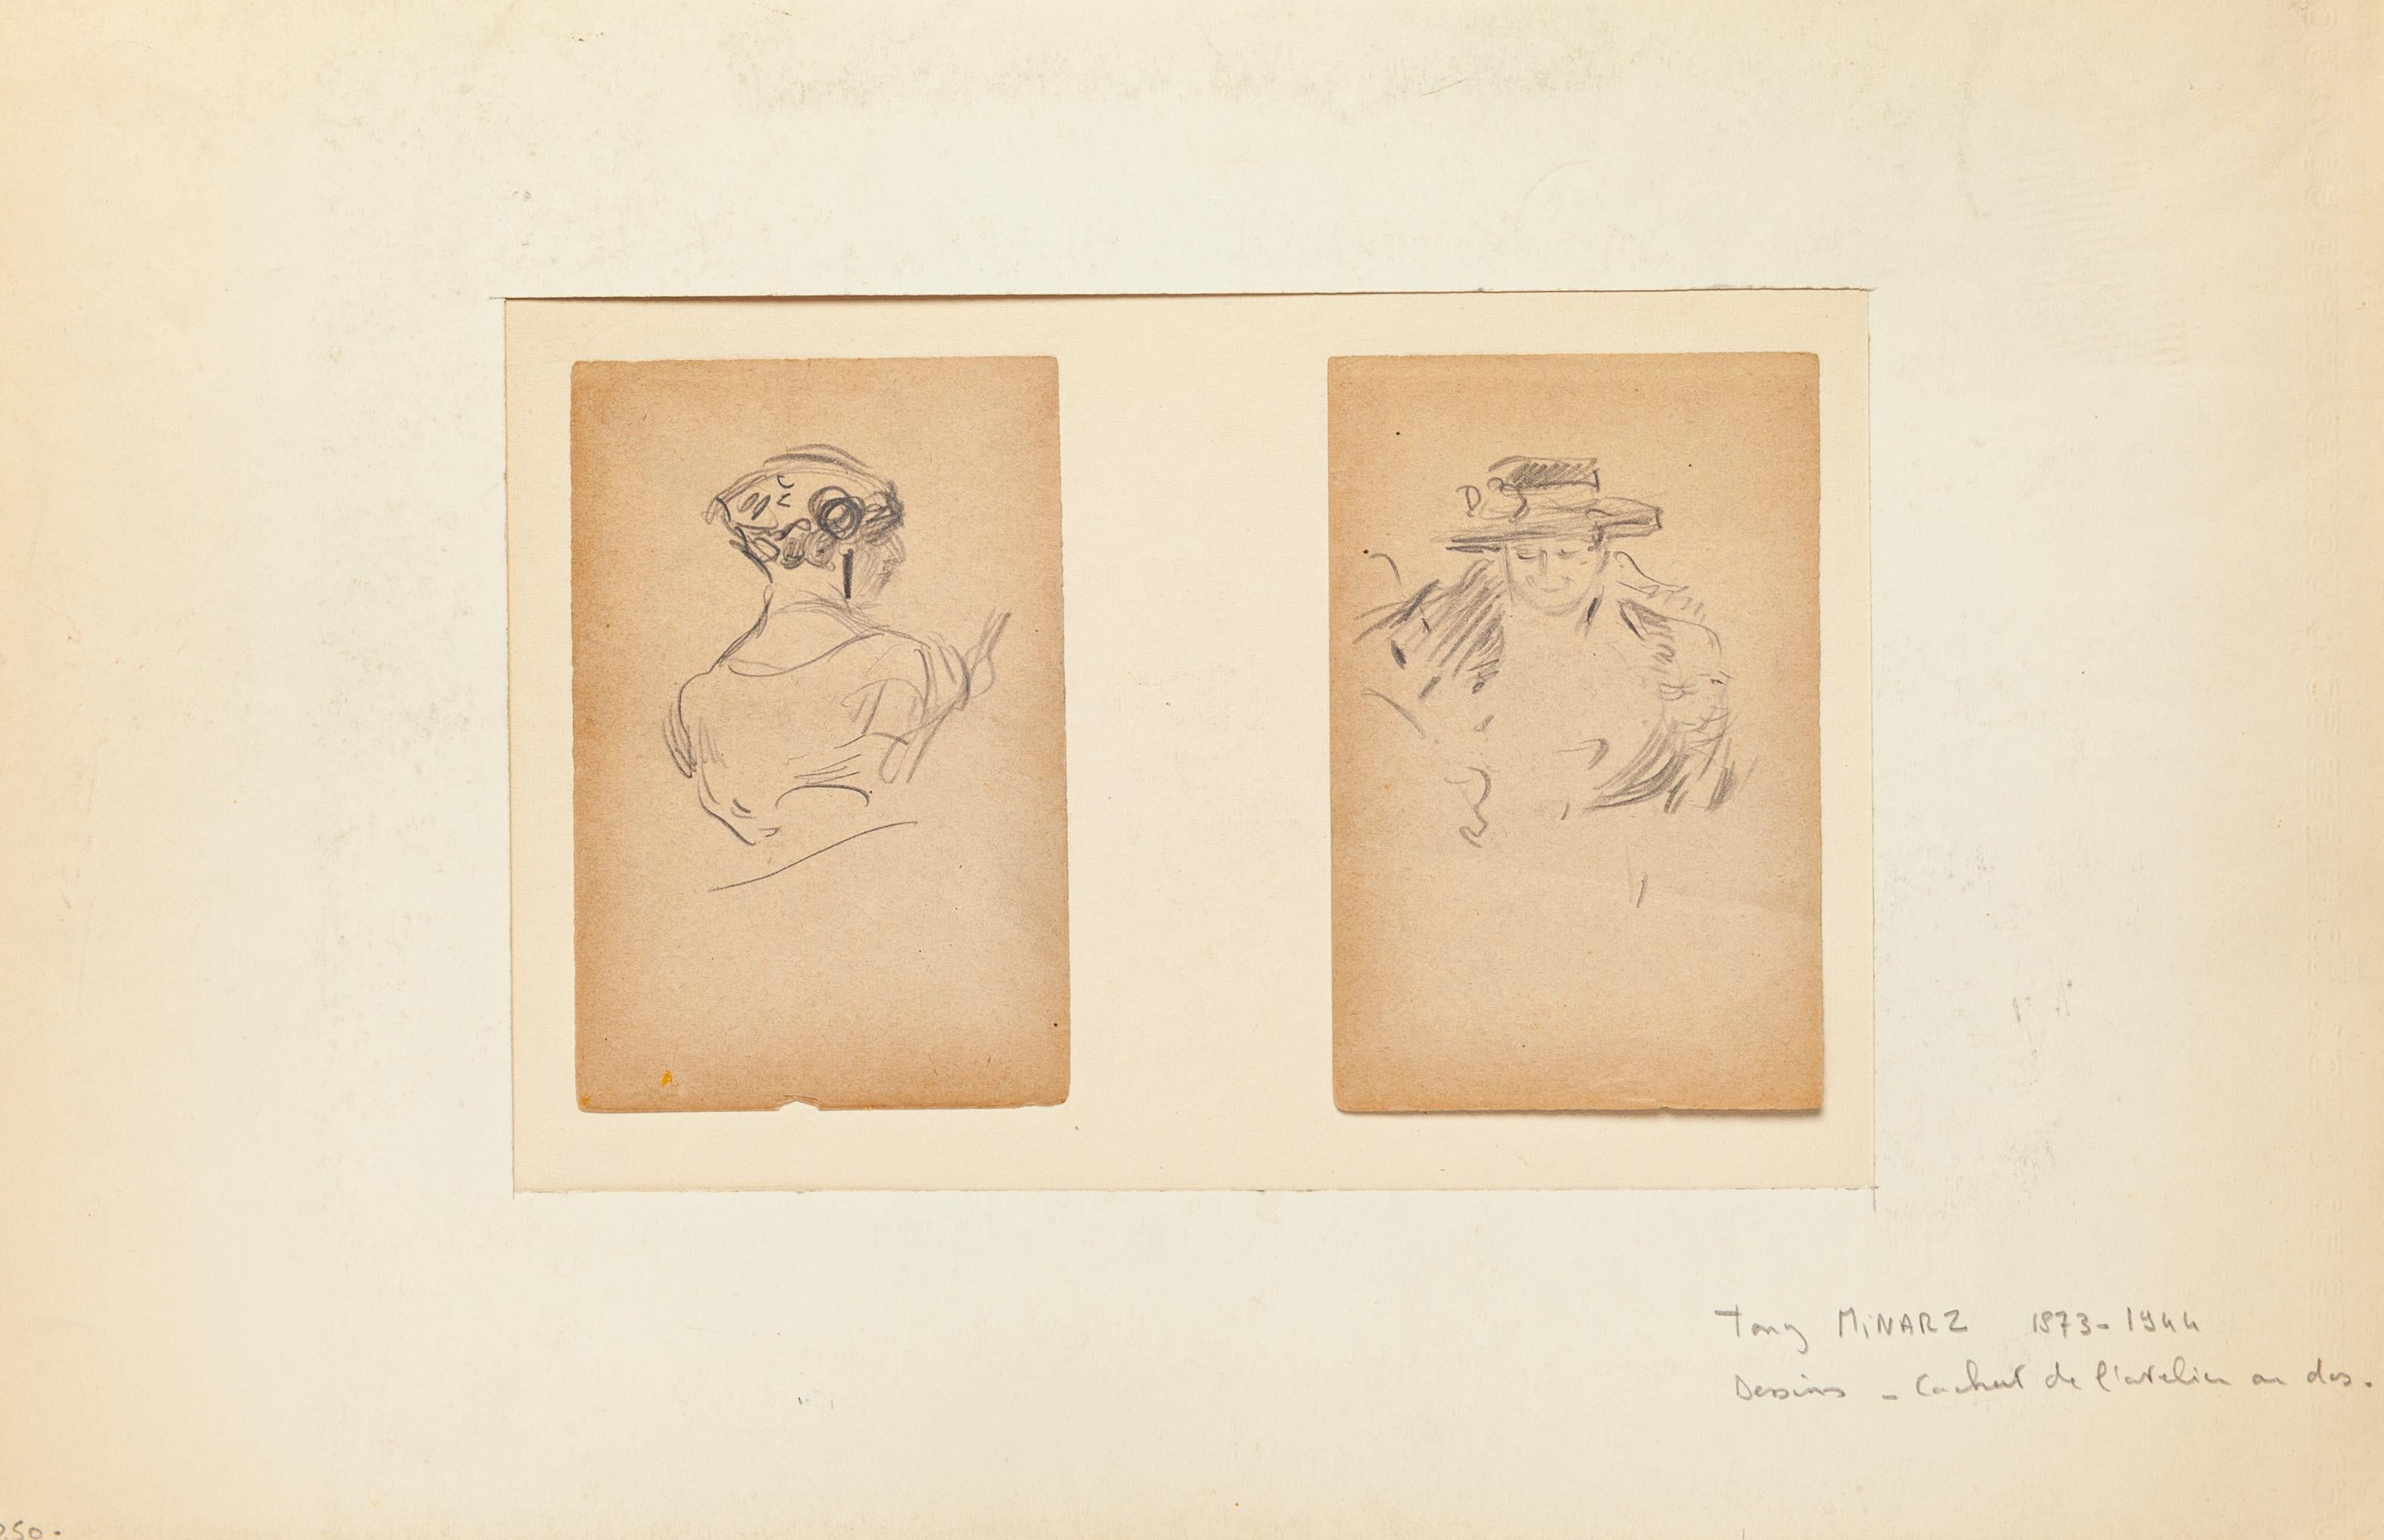 Two Portraits is included two original drawings in pencil on paper, realized byTony Minartz (1873-1944), with the stamp of the artist on the rear.

Sheet dimension: 28 x 18cm.

The state of preservation of the artwork is good.

The artwork